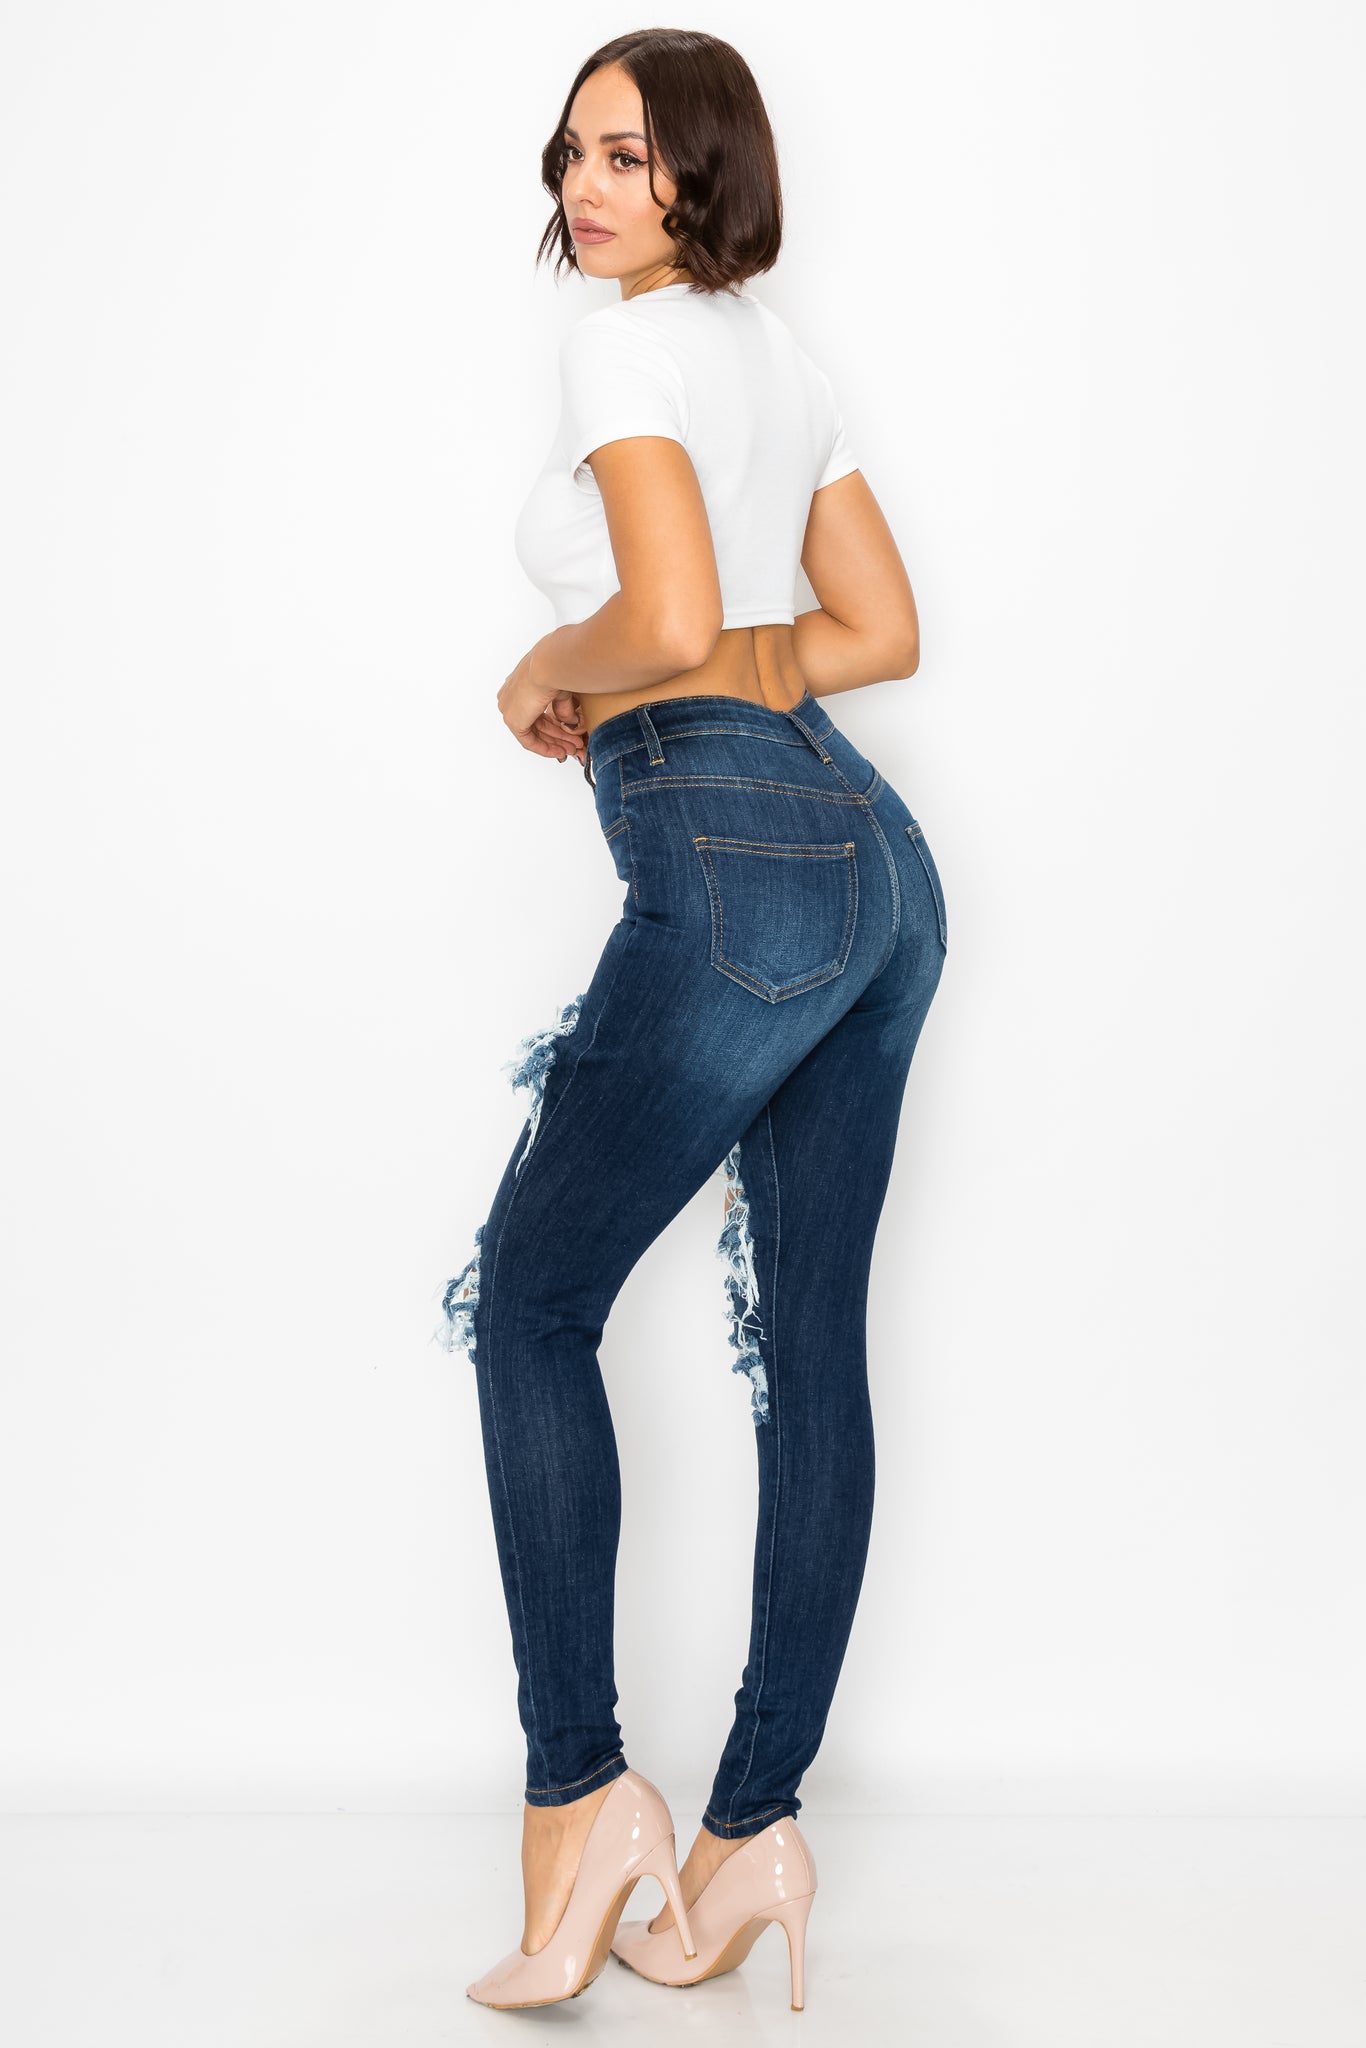 40292 Women's High Waisted Distressed Skinny Jeans with Whiskers